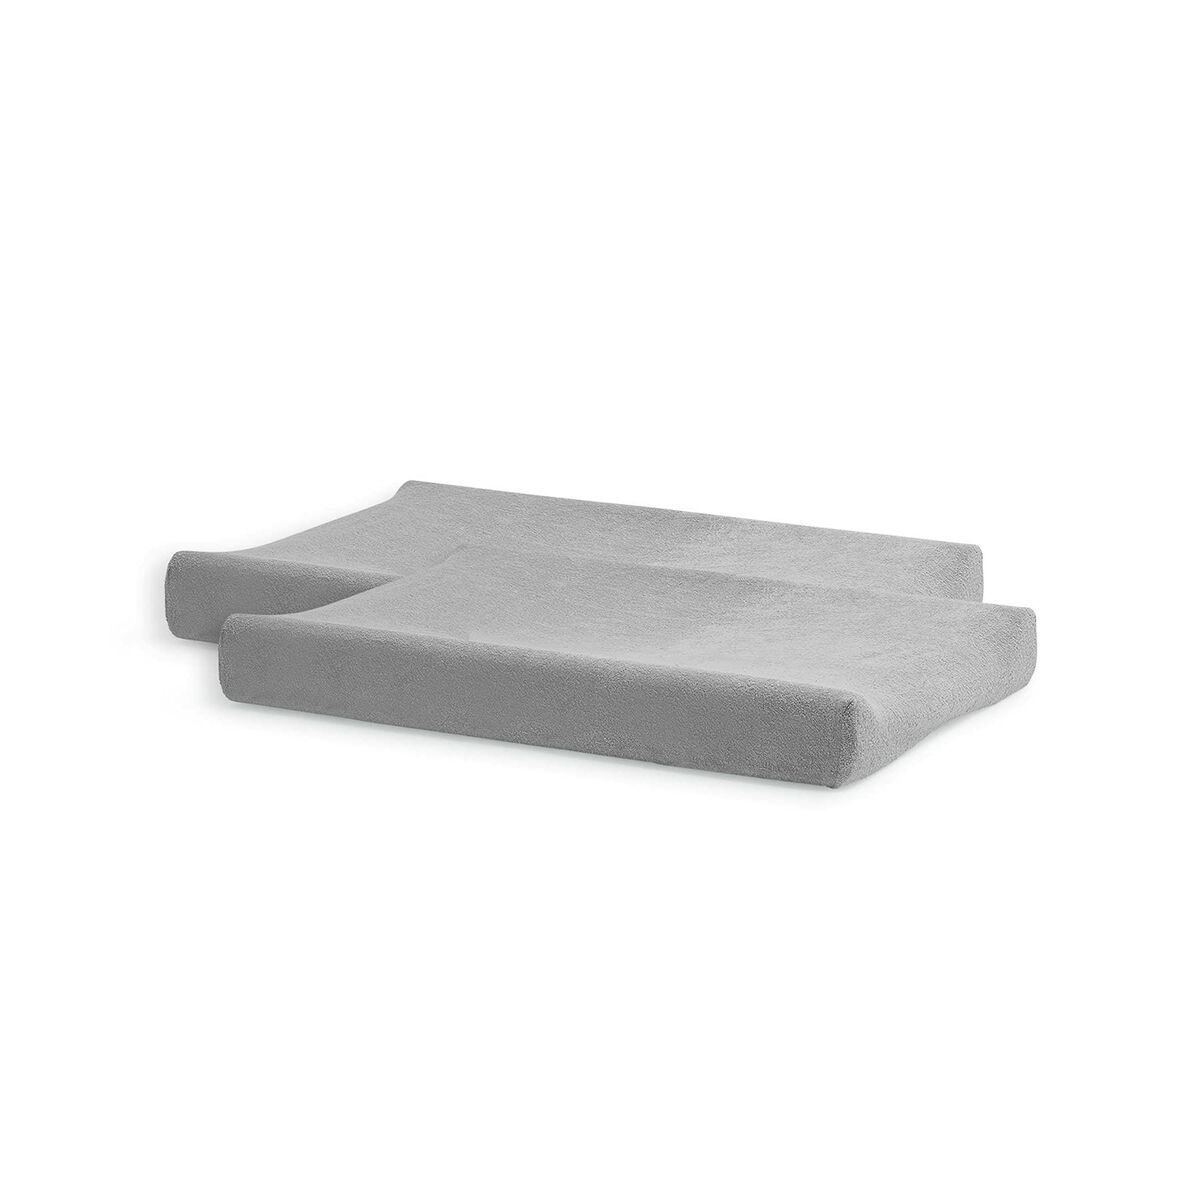 Fitted bottom sheet 2550-503-00078 Grey 50 x 70 cm Changer (Refurbished A+)